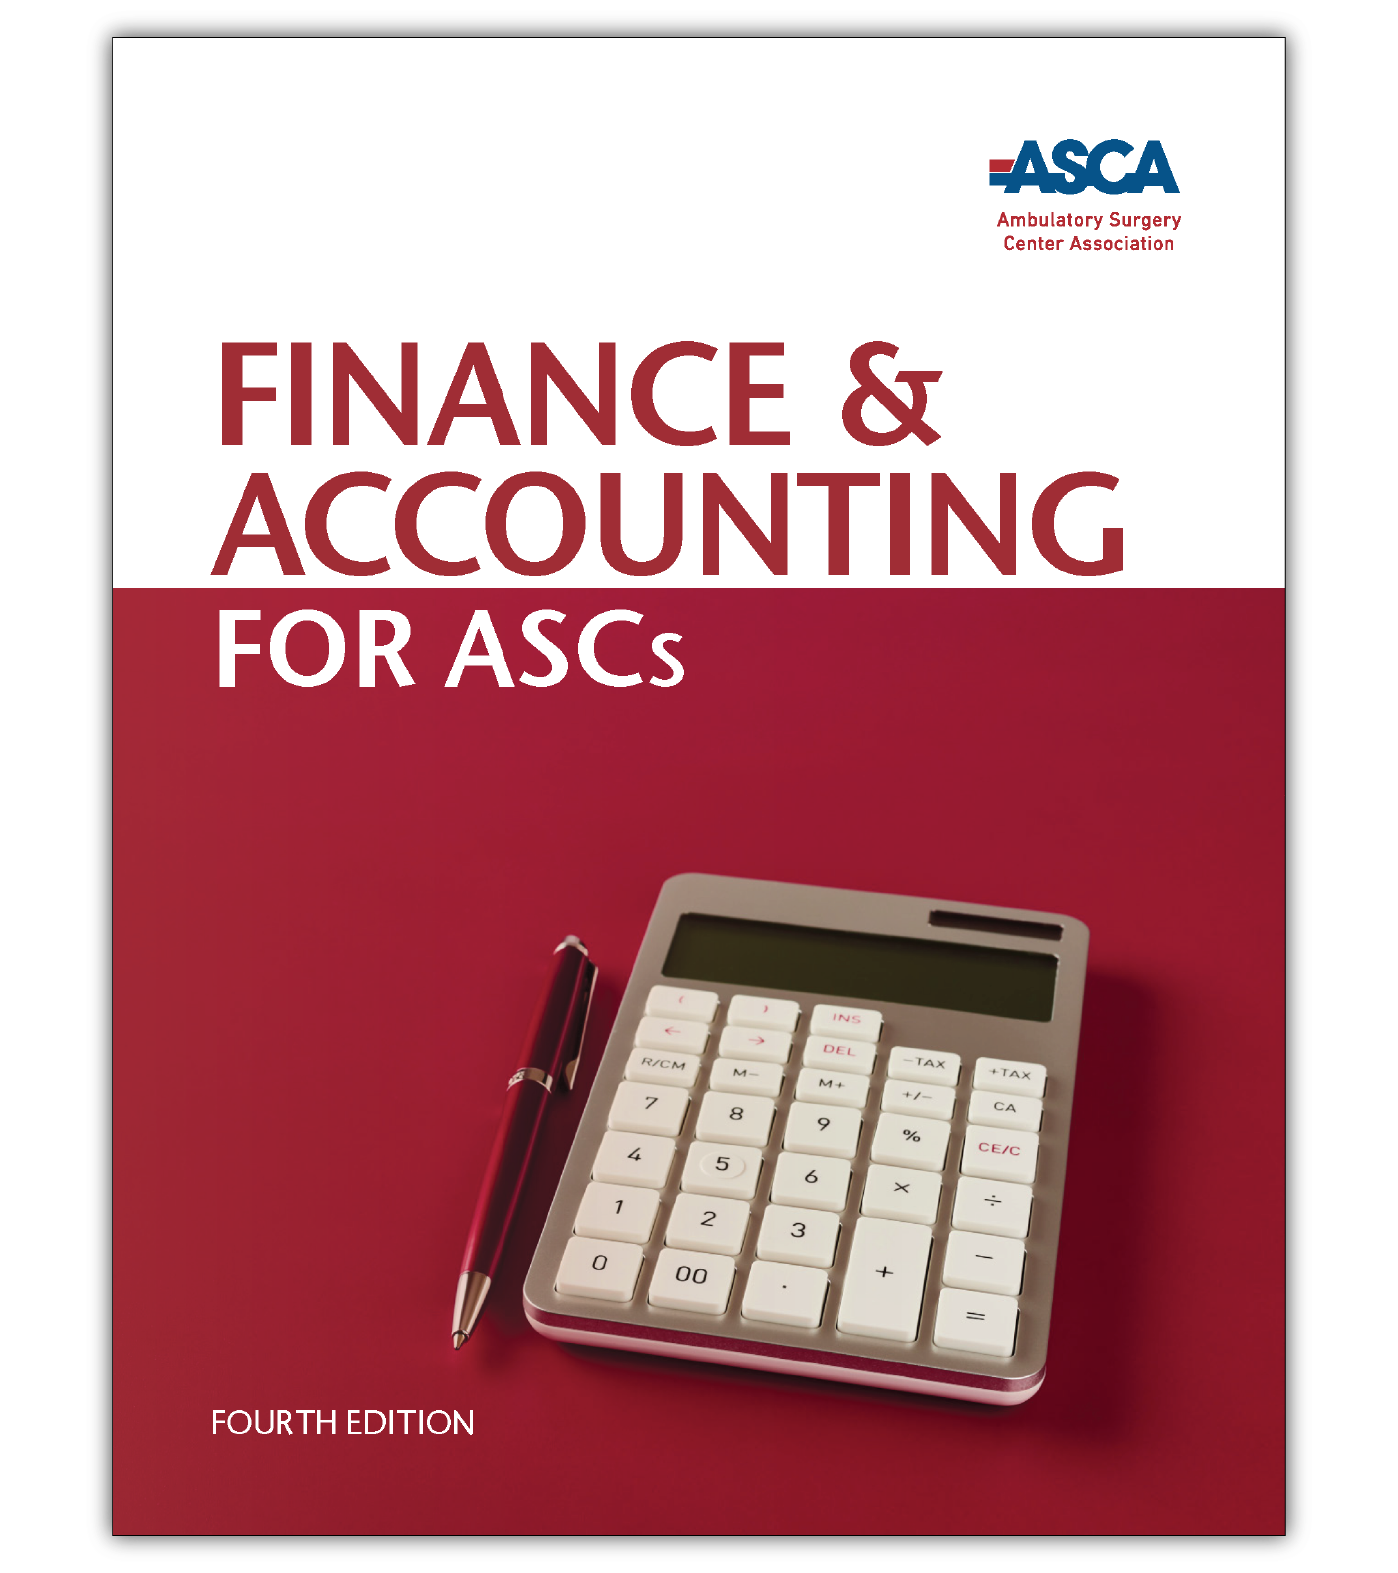 Finance & Accounting for ASCs, 4th Edition (Paperback)